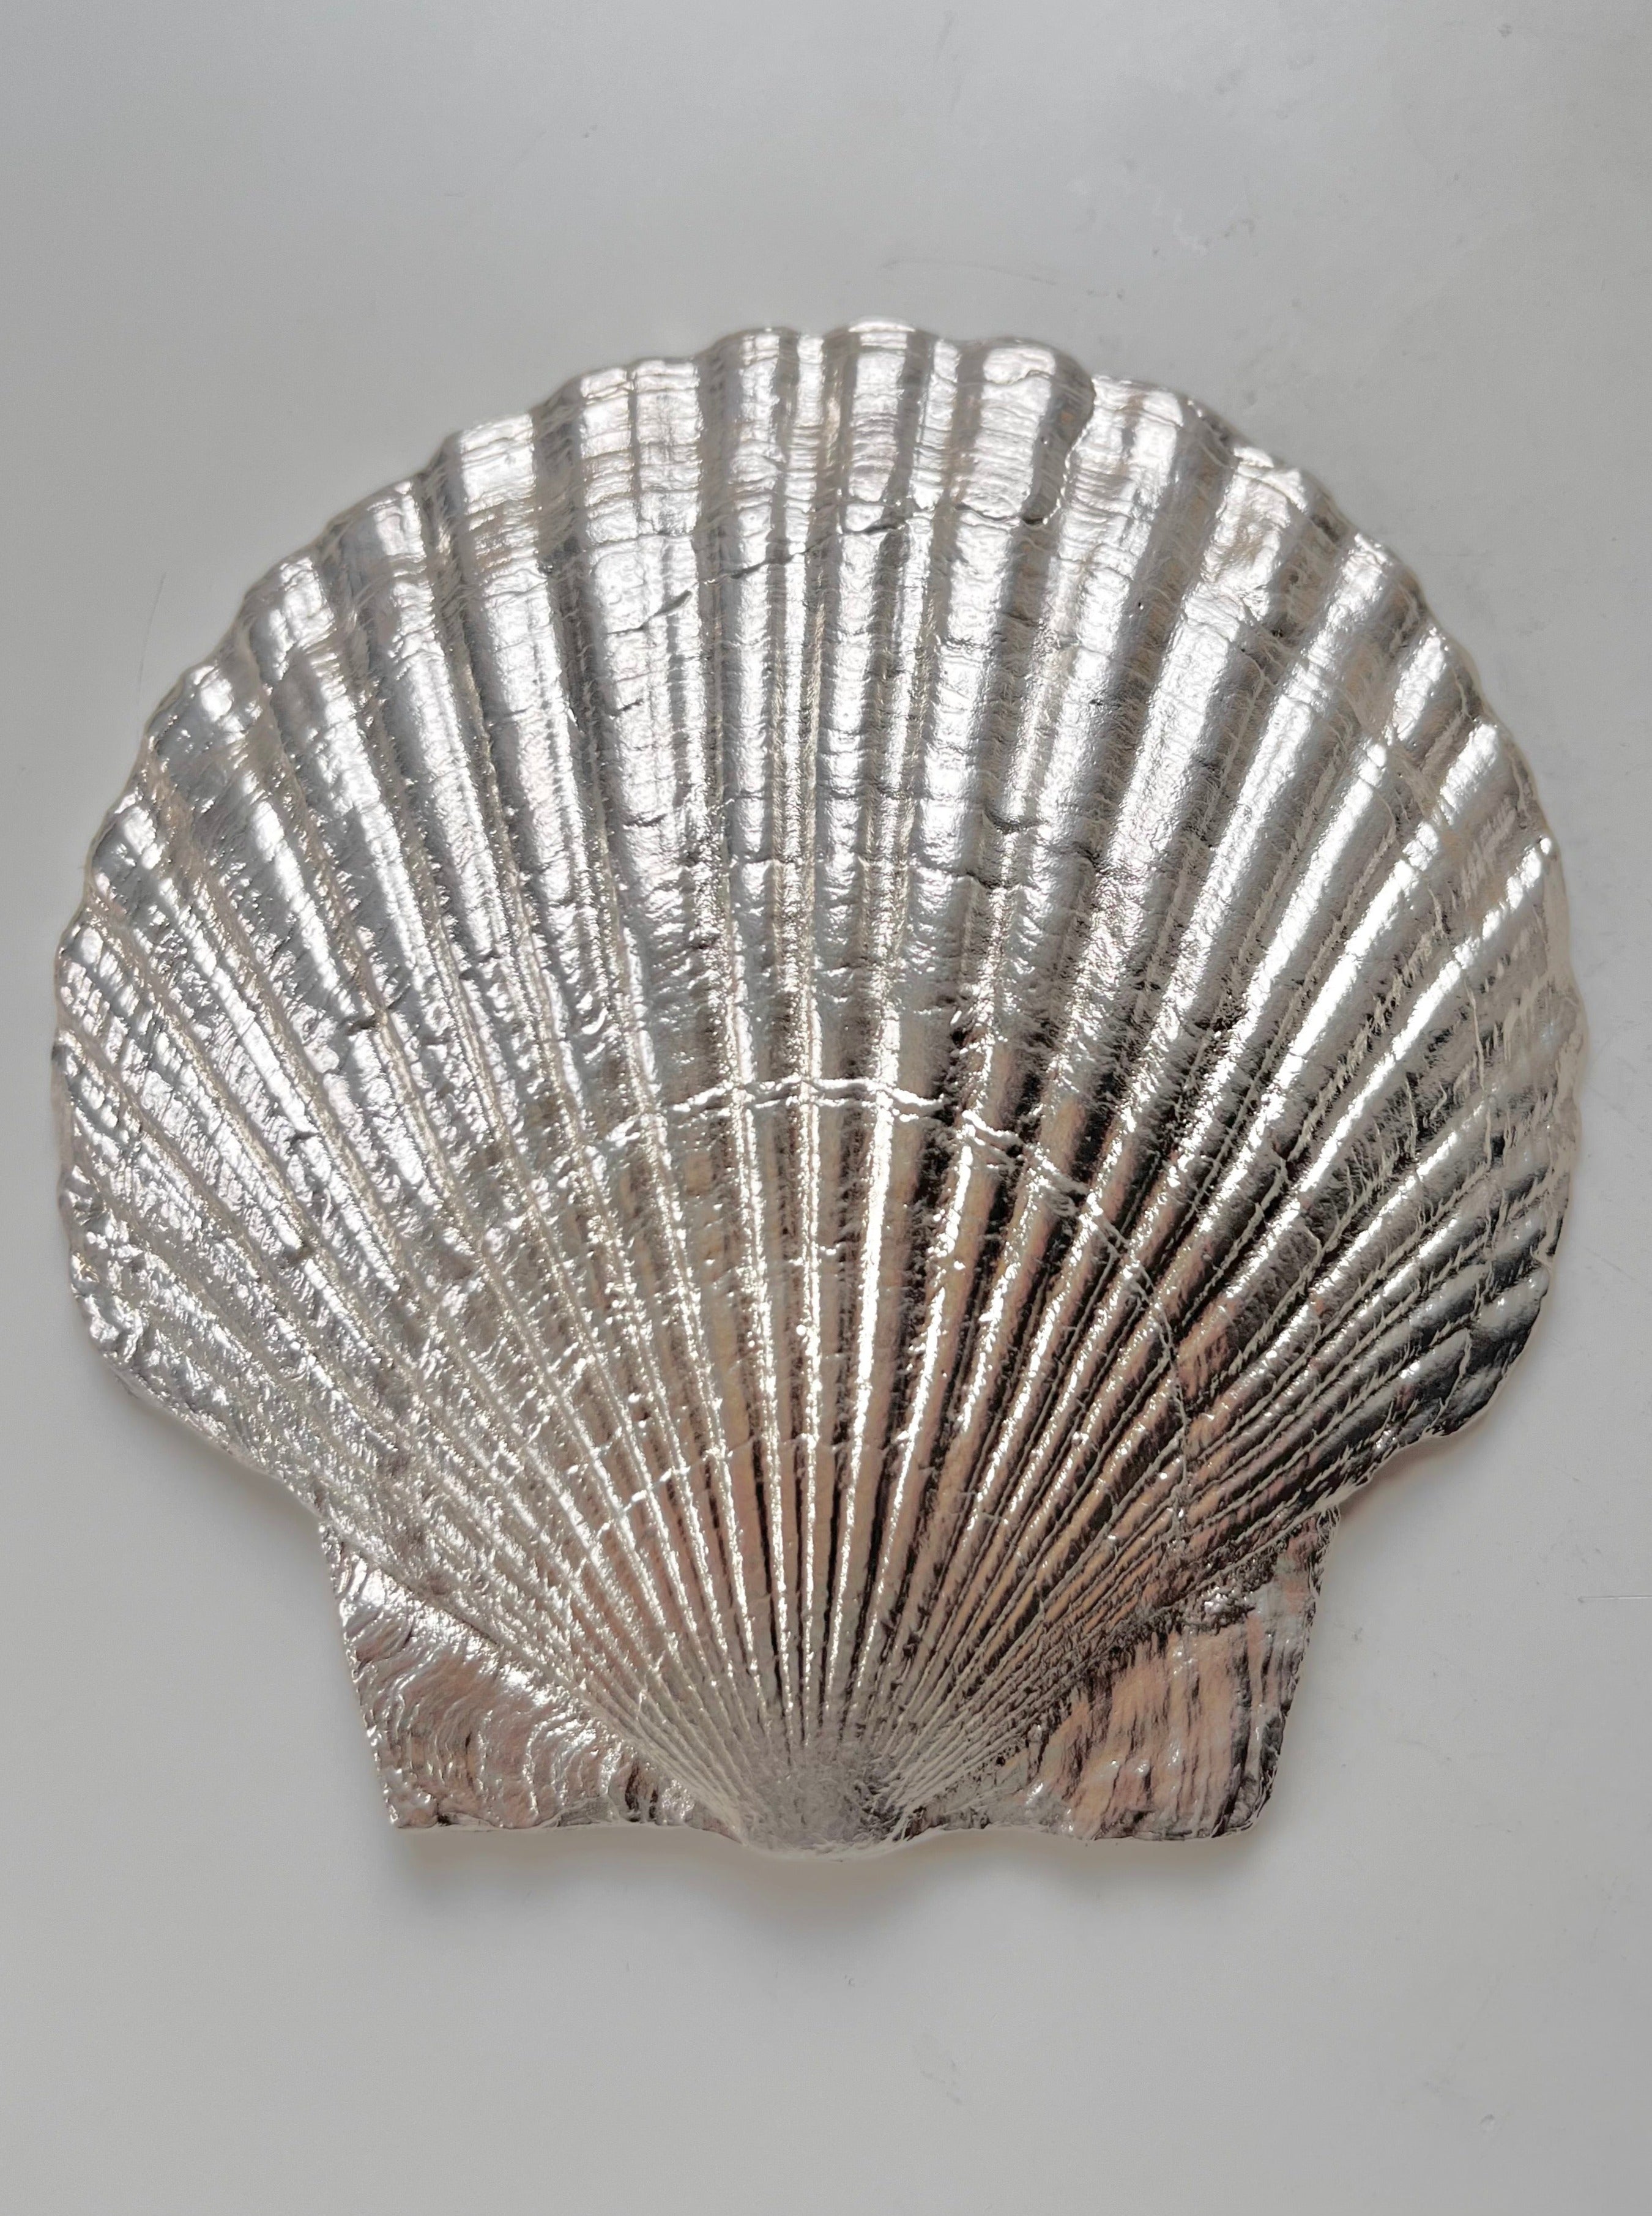 Elegant handcrafted silver plated clam shell plate for serving seafood